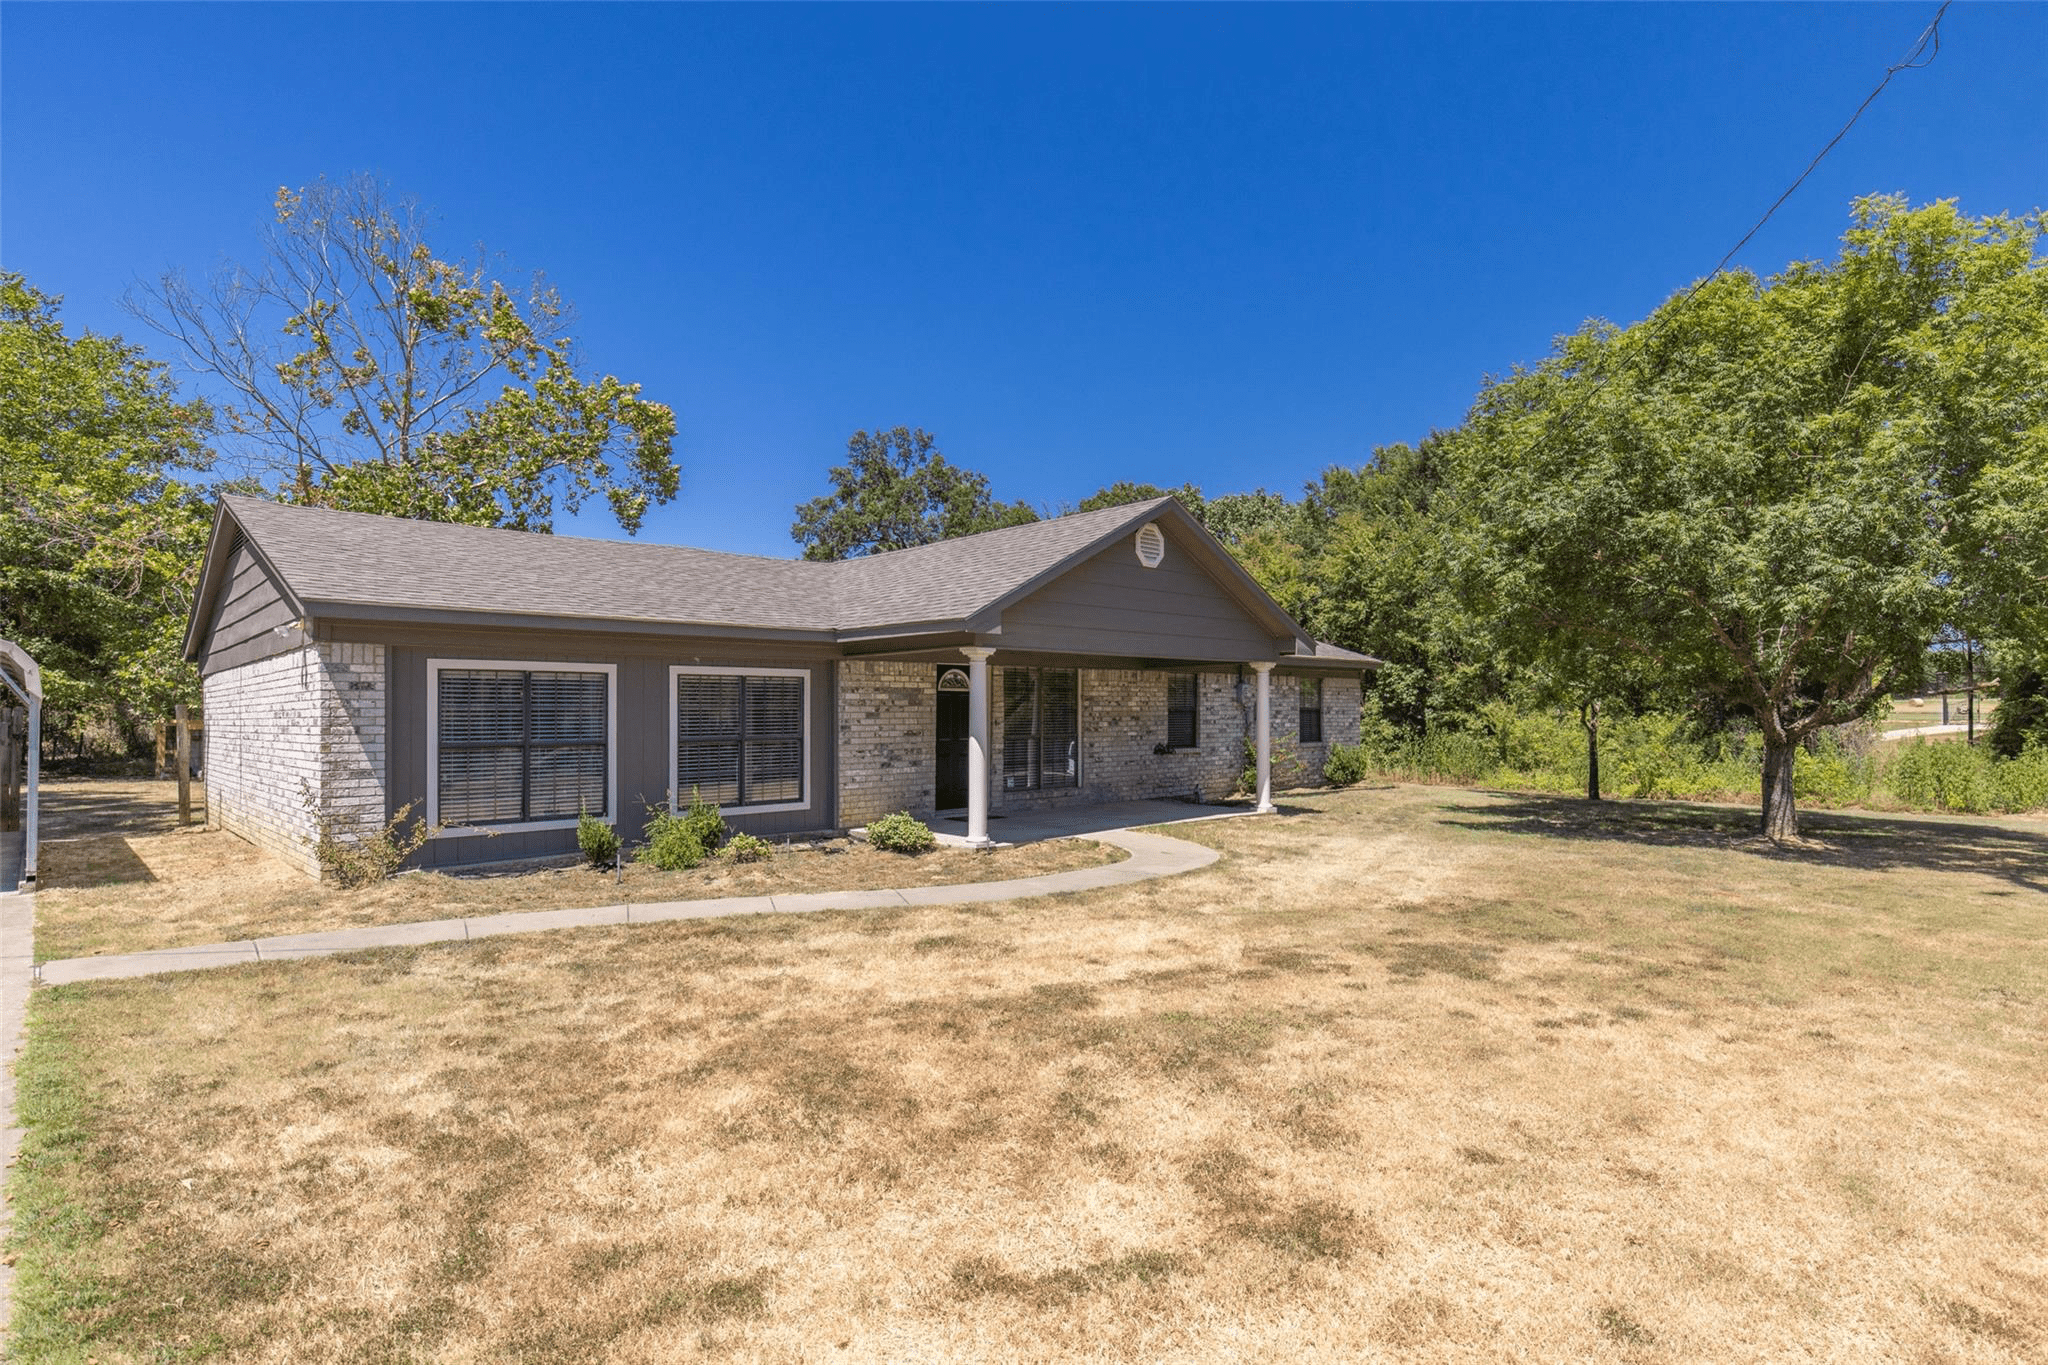 Looking for a Spacioius Bungalow on a Quiet Country Lot South of Sulphur Springs?